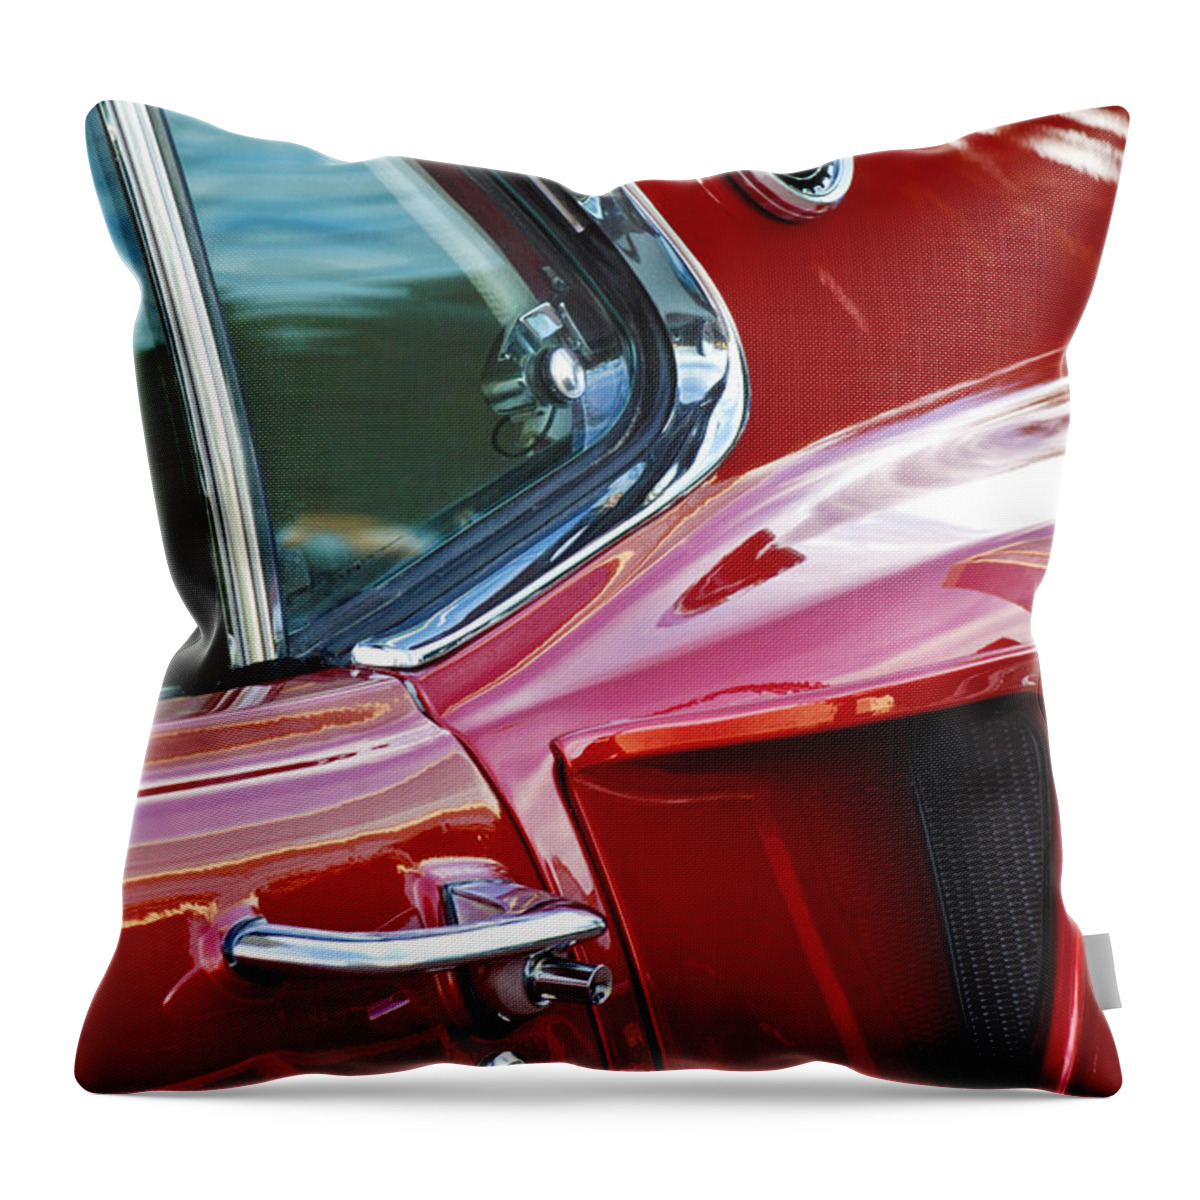 1969 Ford Mustang Mach 1 Throw Pillow featuring the photograph 1969 Ford Mustang Mach 1 Side Scoop by Jill Reger